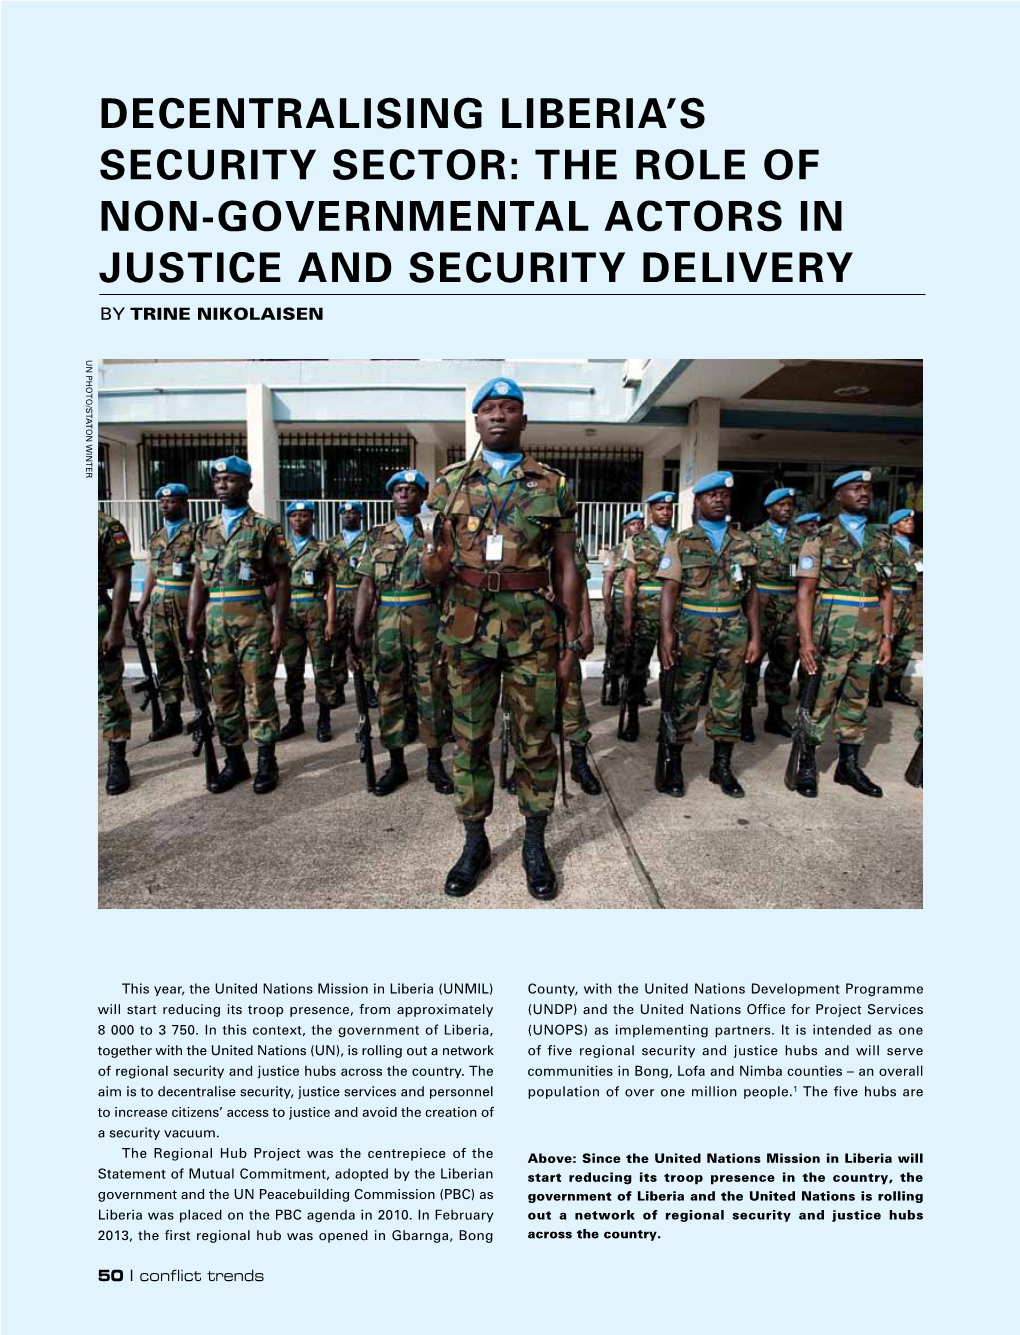 Decentralising Liberiats Security Sector: the Role